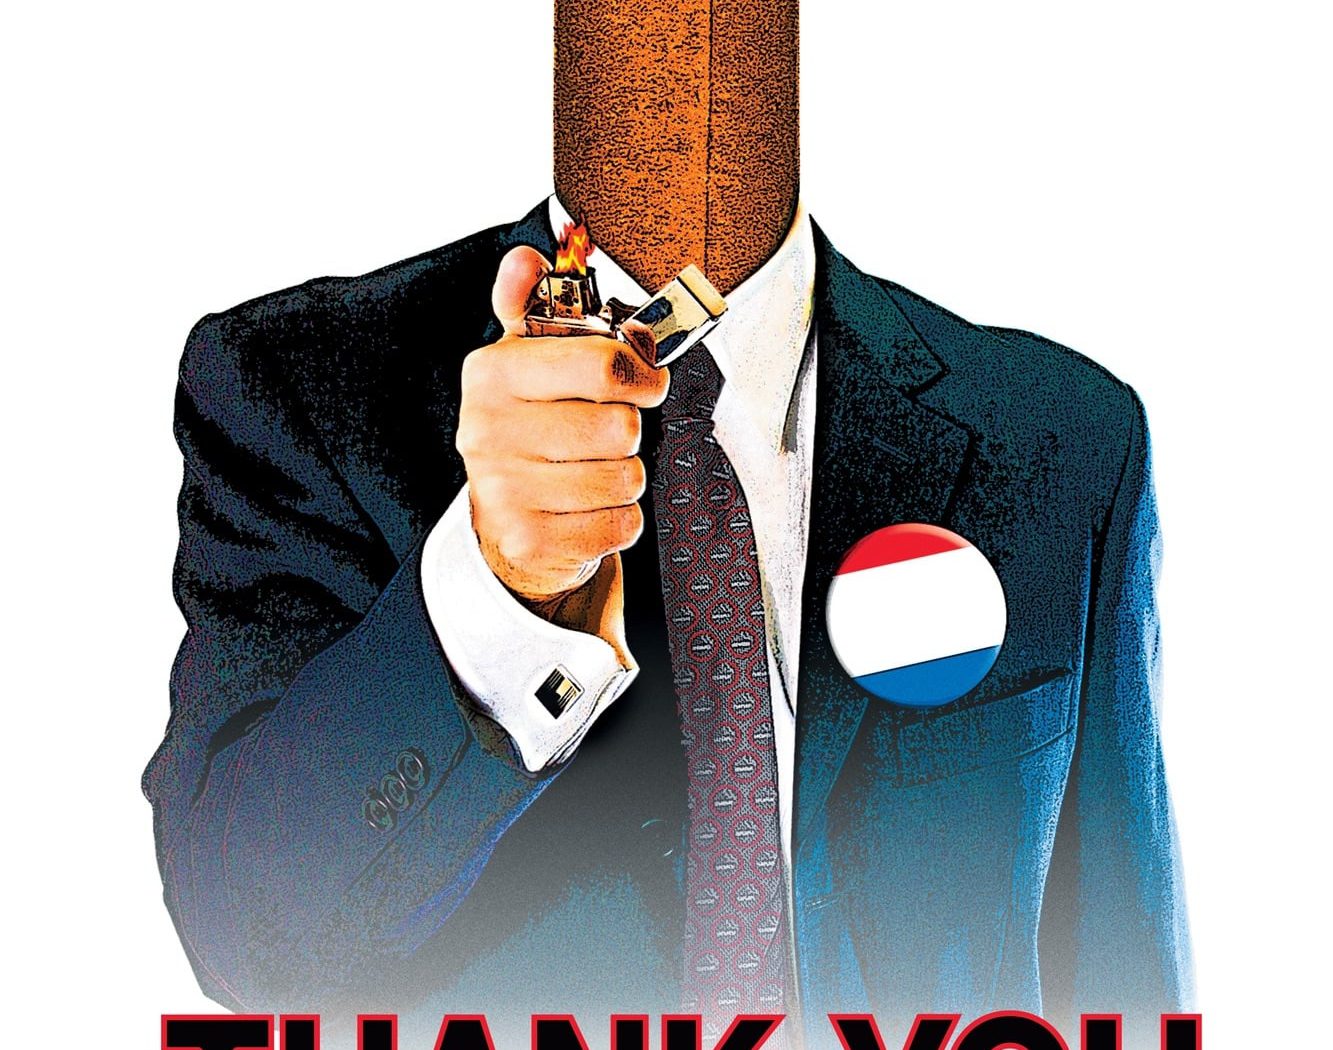 Poster for the movie "Thank You for Smoking"